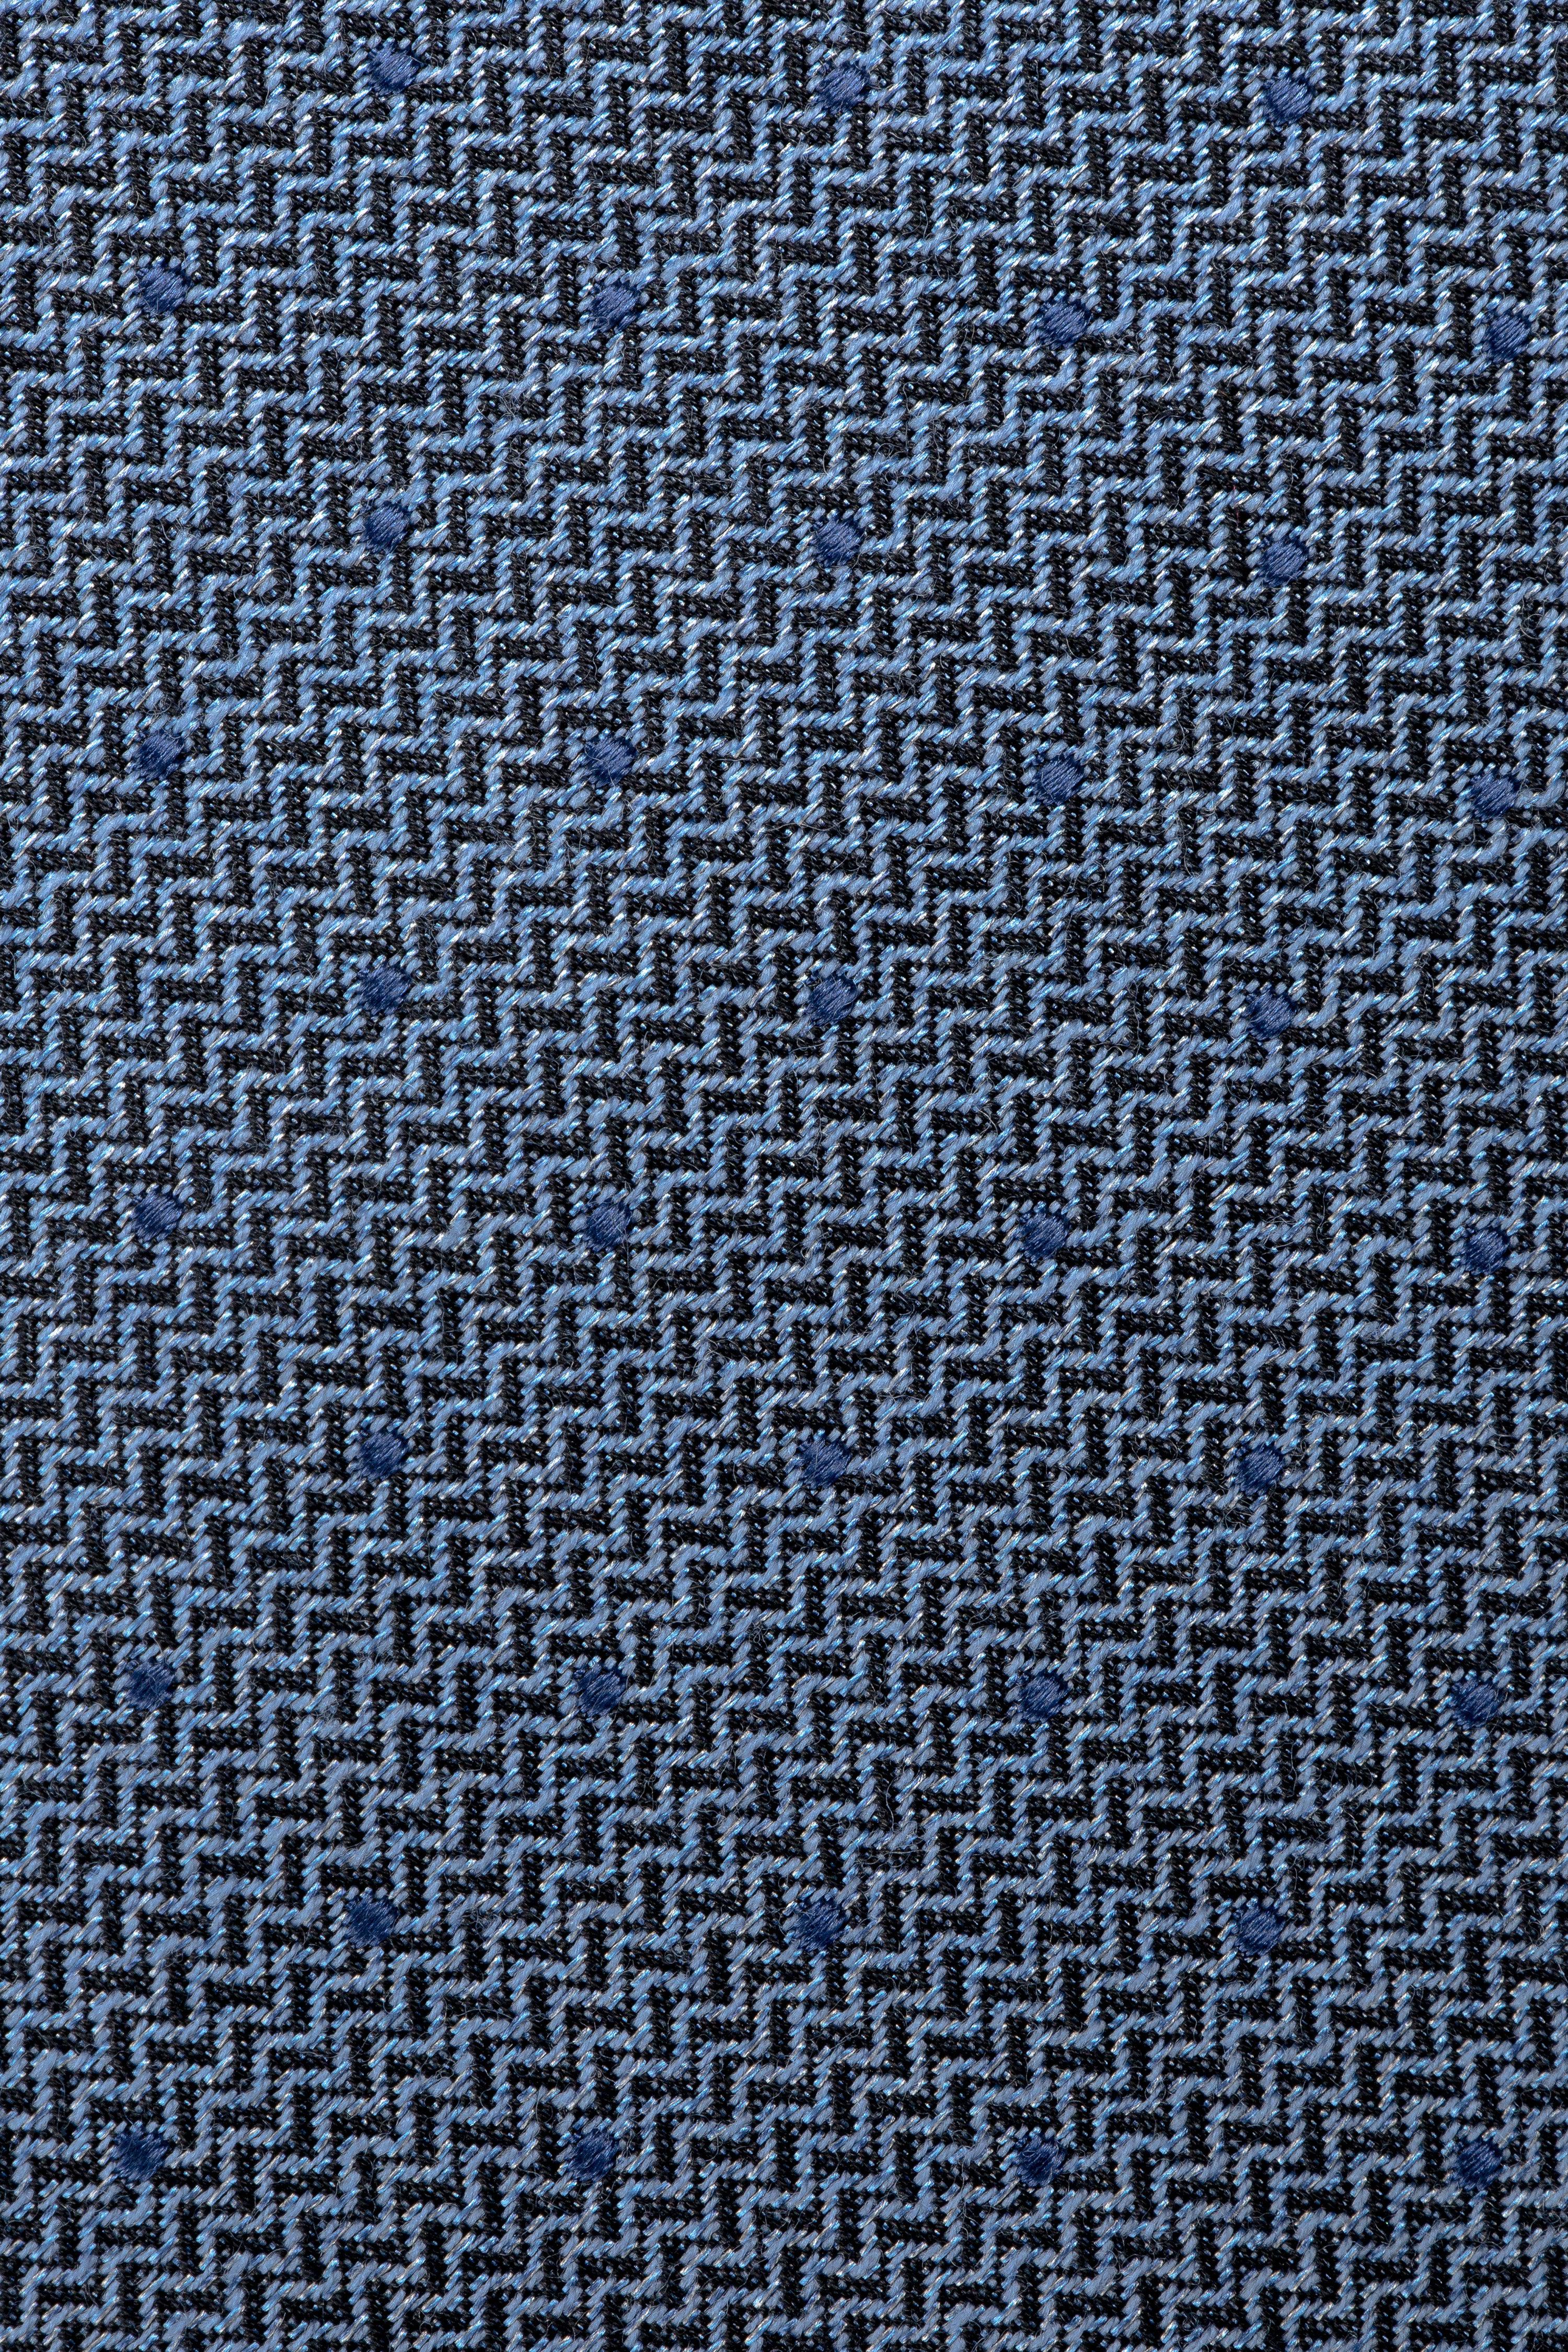 Alt view 1 Pindot Woven Tie in Blue